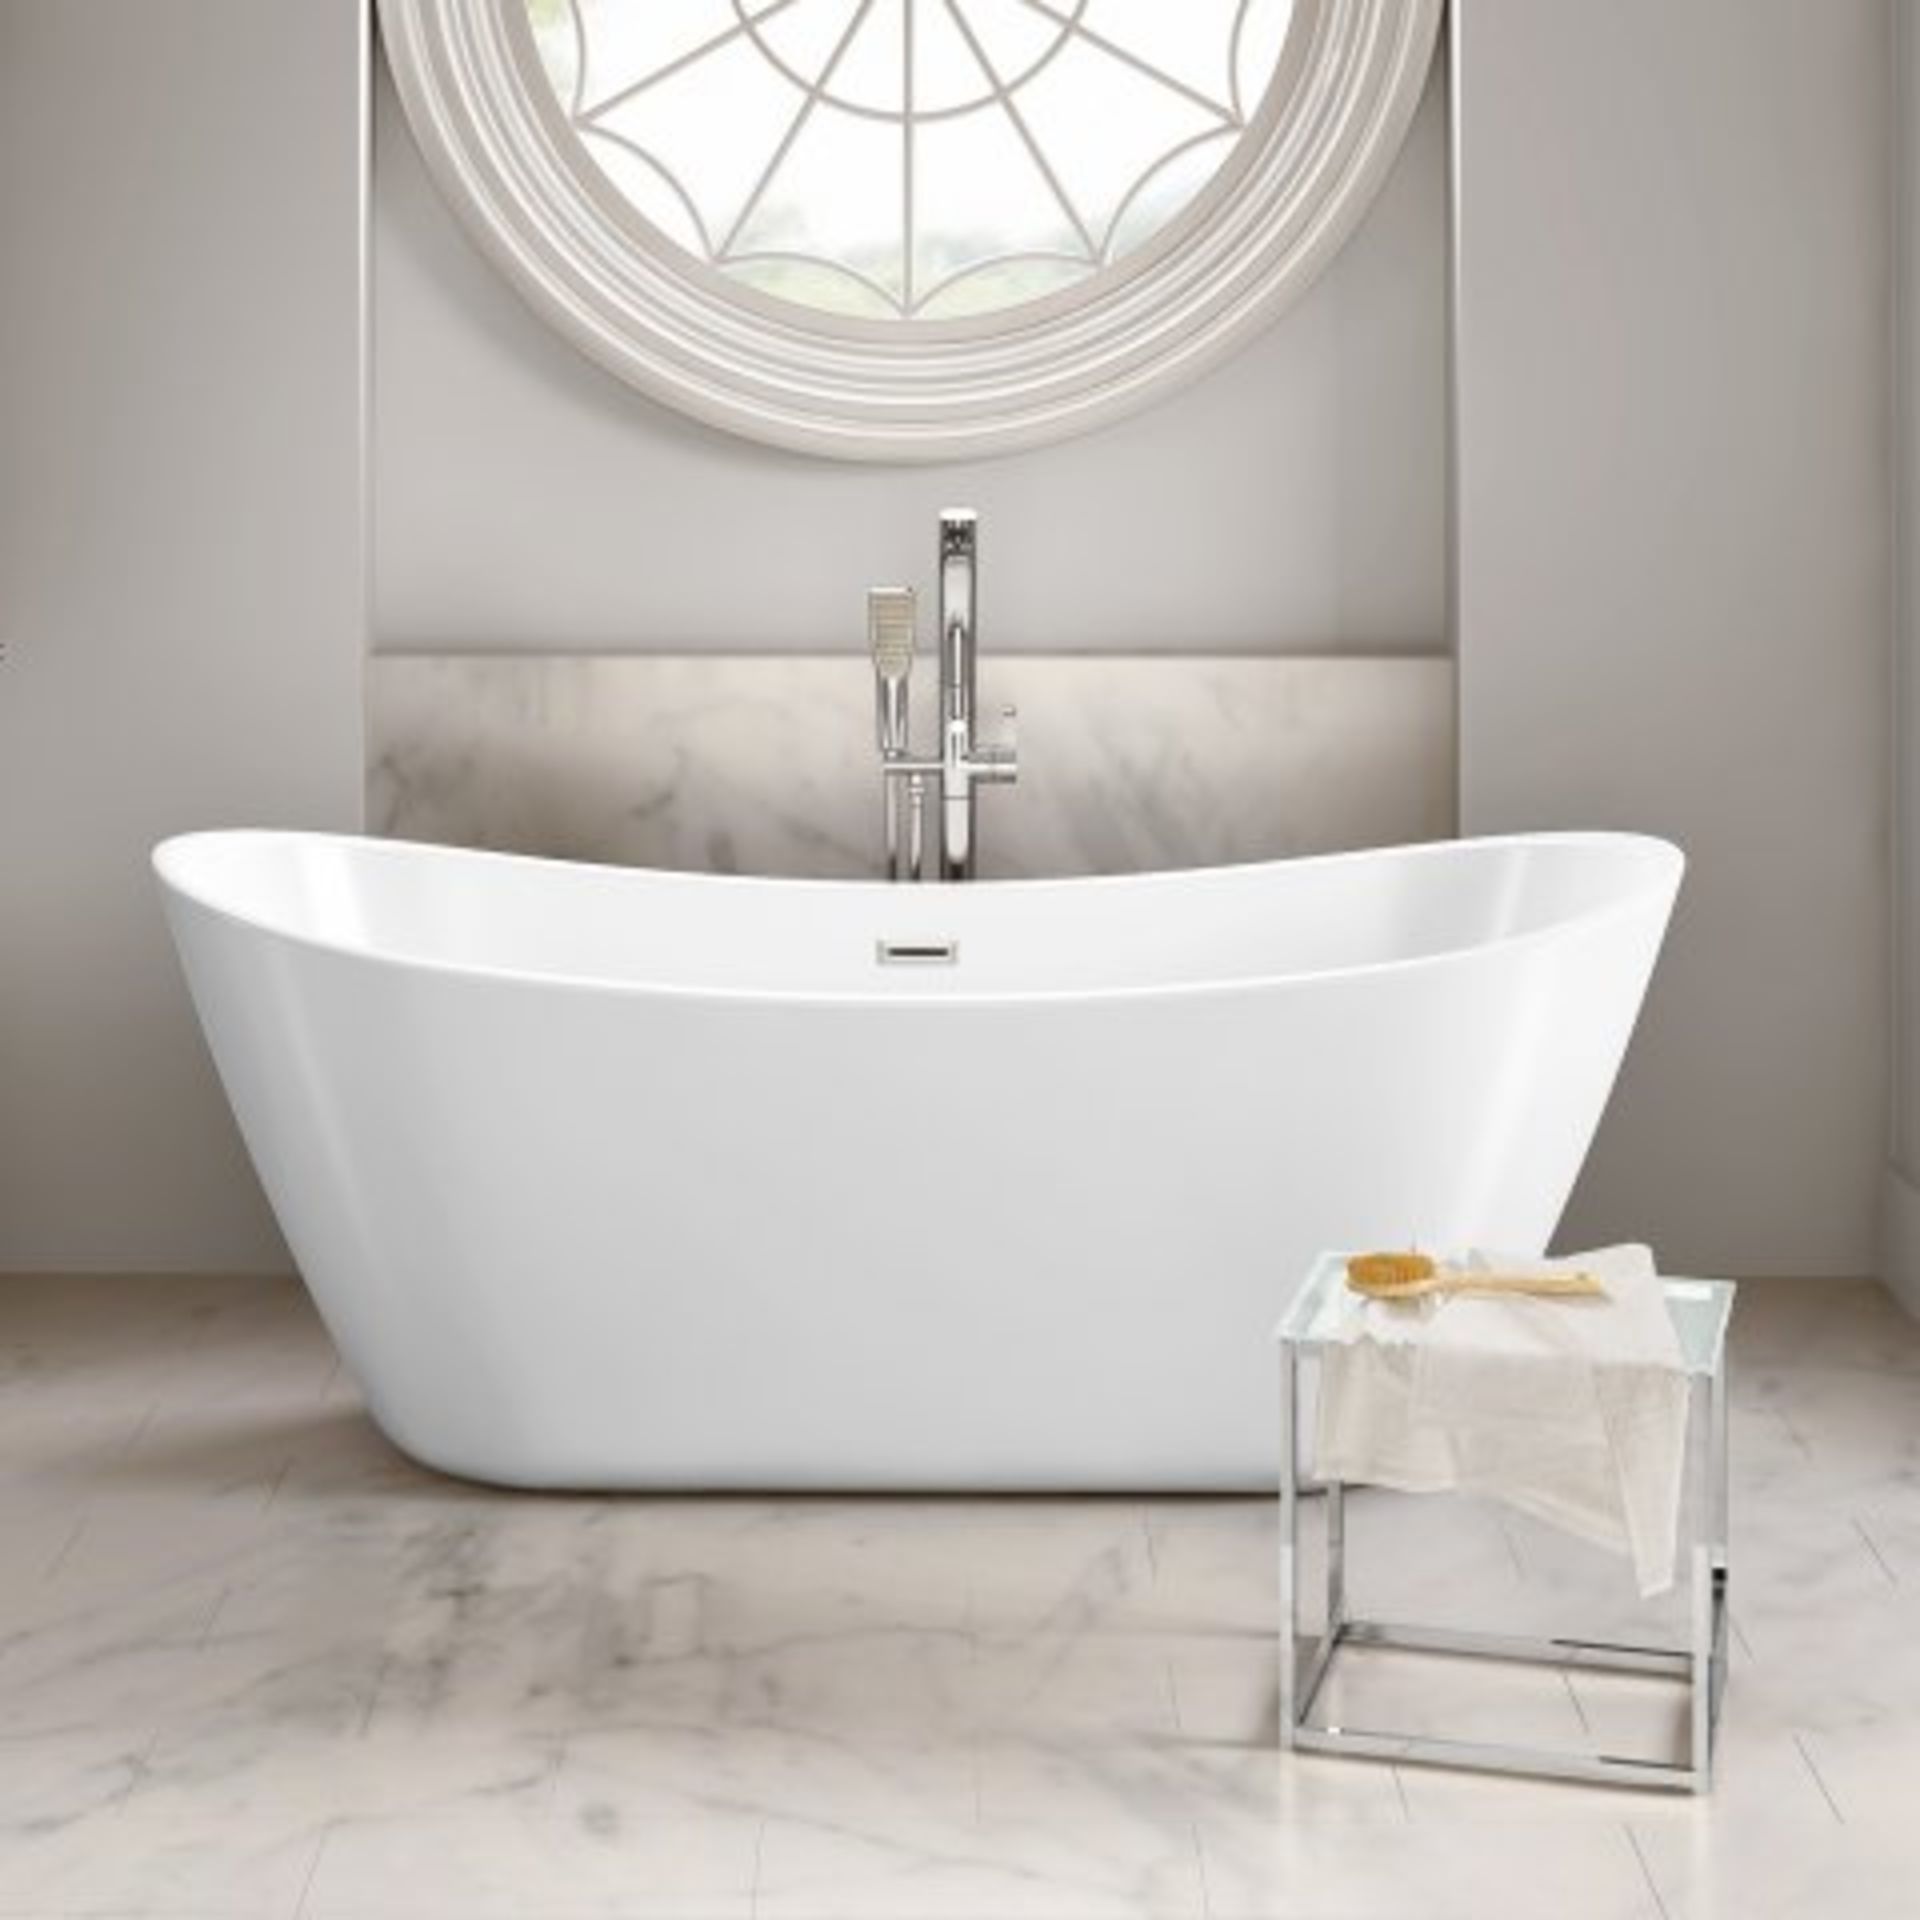 (H8) 1830mmx710mm Caitlyn Freestanding Bath - Large. RRP £1,499. Showcasing contemporary clean lines